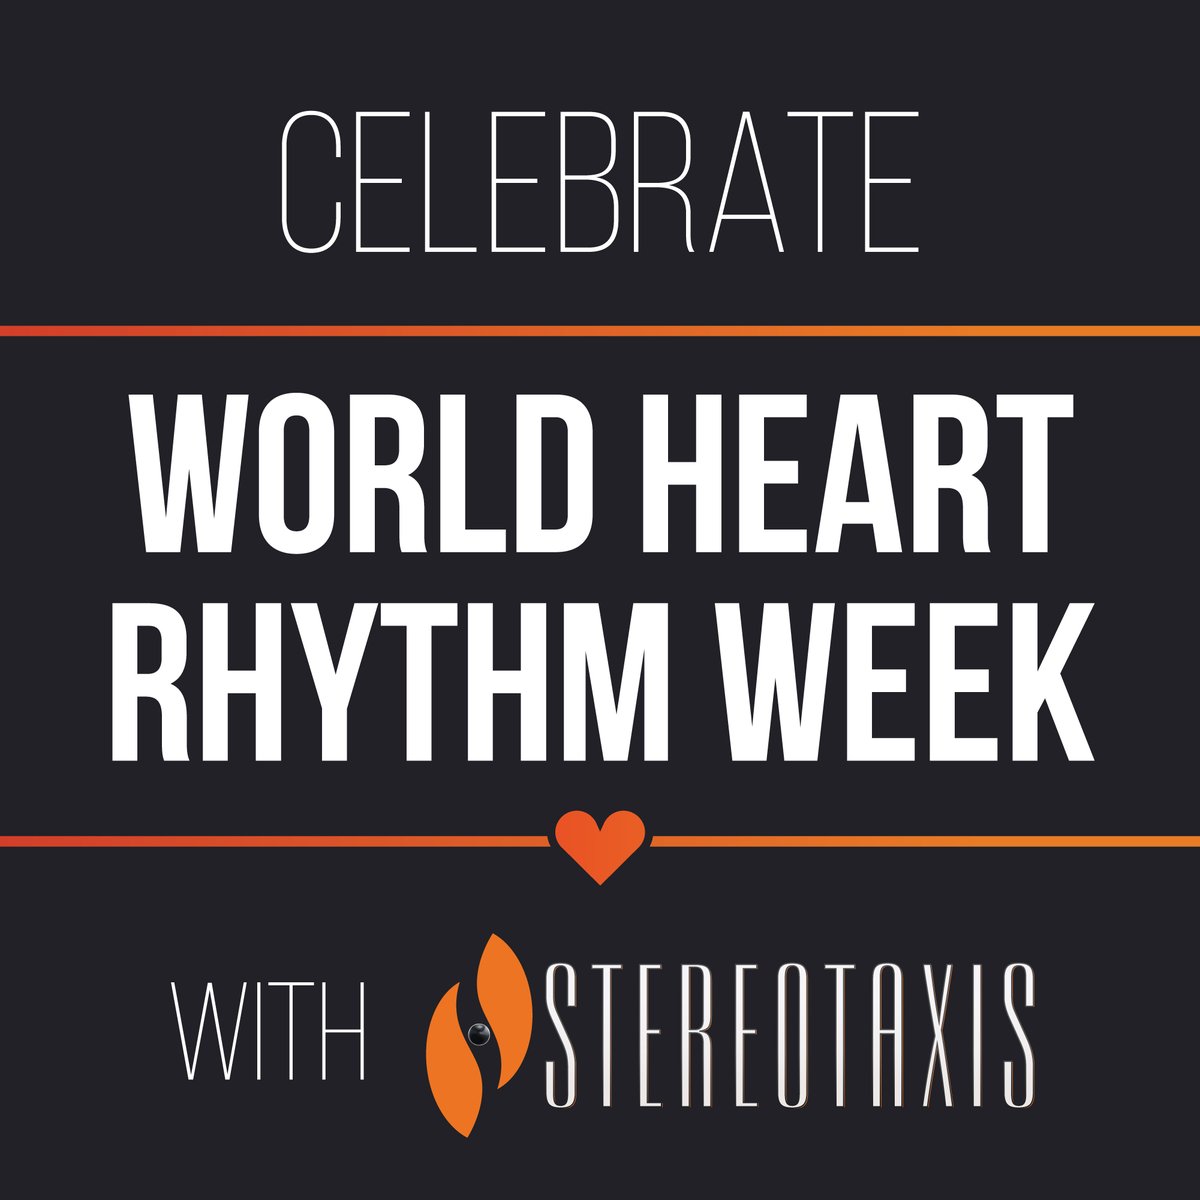 It’s #WorldHeartRhythmWeek! 💓
We encourage learning more about arrhythmias by watching our videos on RoboticHeartCare.com & Youtube.com/Stereotaxis.
Thanks, @HeartRhythm_US, @BlackoutsTrust, @AtrialFibUK for raising awareness & celebrating innovations in #ArrhythmiaTreatment.